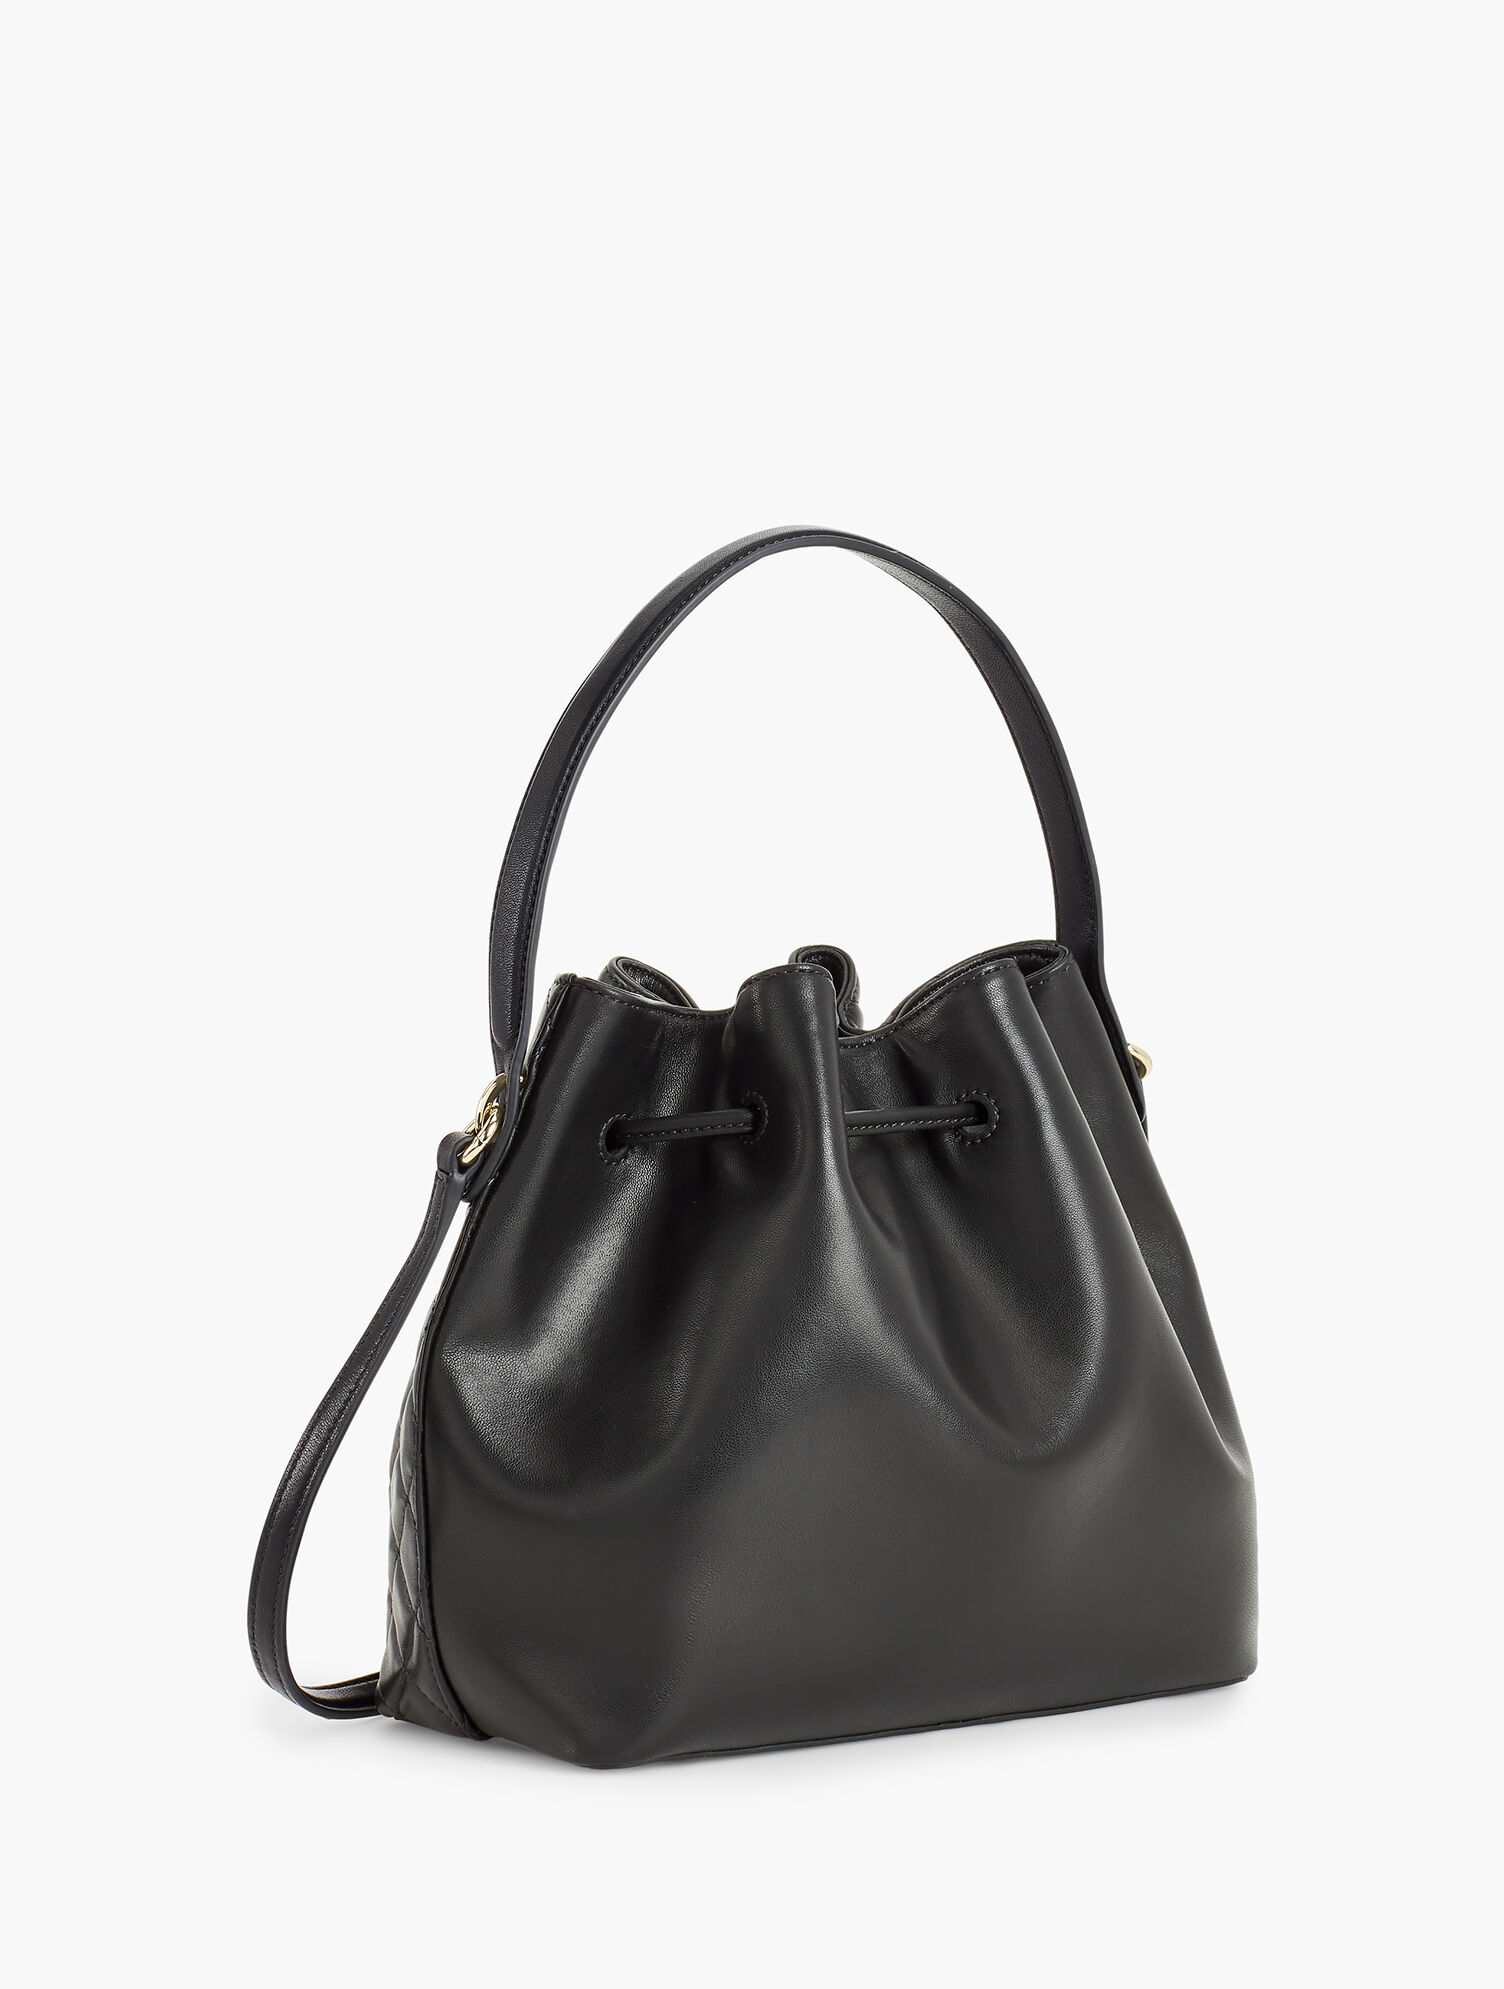 Nappa leather bucket bag with seam details